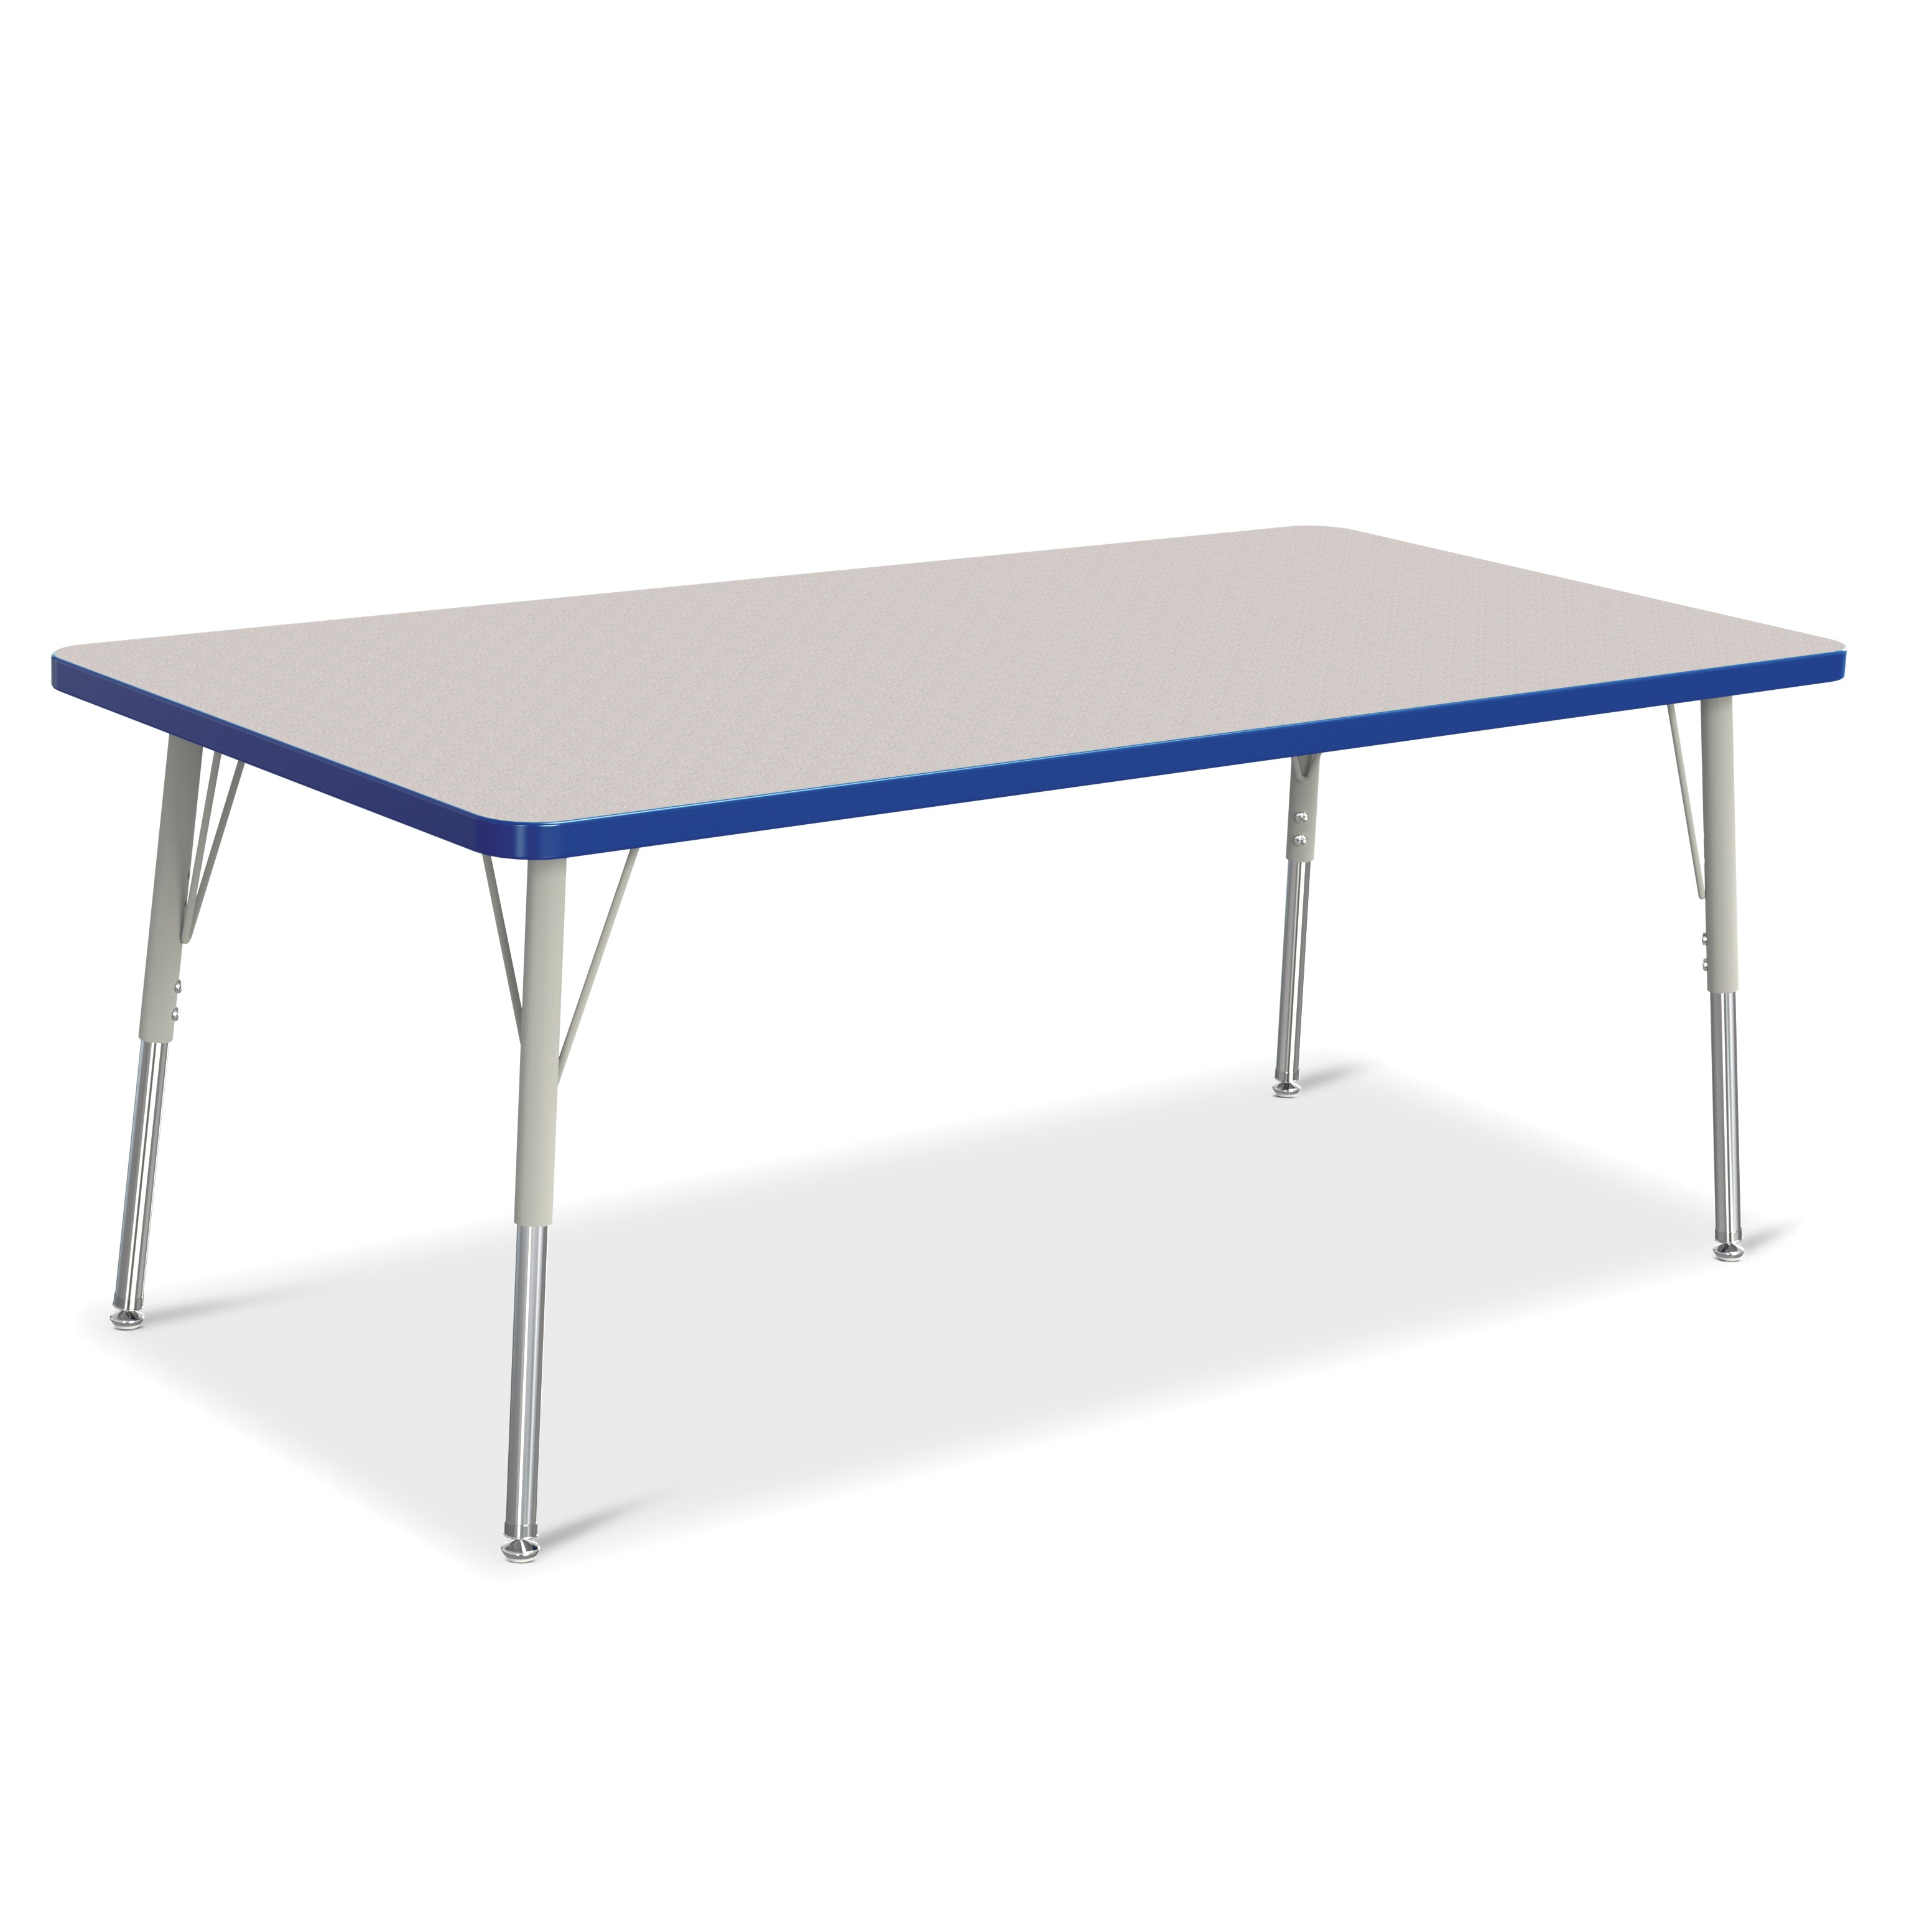 6408JCA003, Berries Rectangle Activity Table - 30" X 60", A-height - Freckled Gray/Blue/Gray